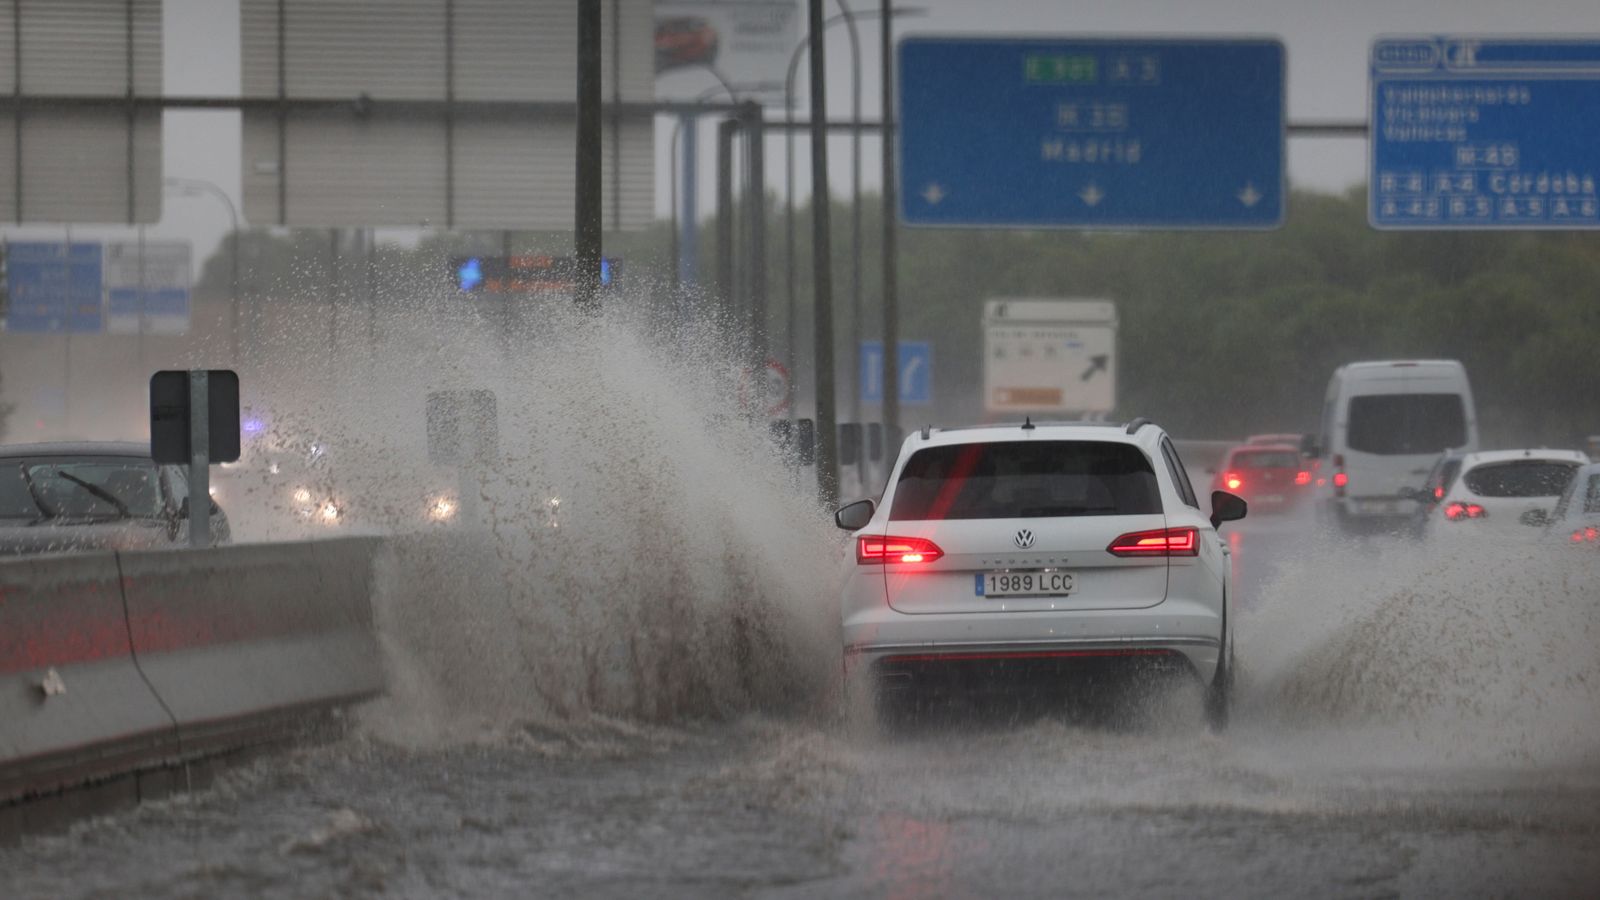 Heavy rain batters parts of Spain as mayor urges residents to stay indoors